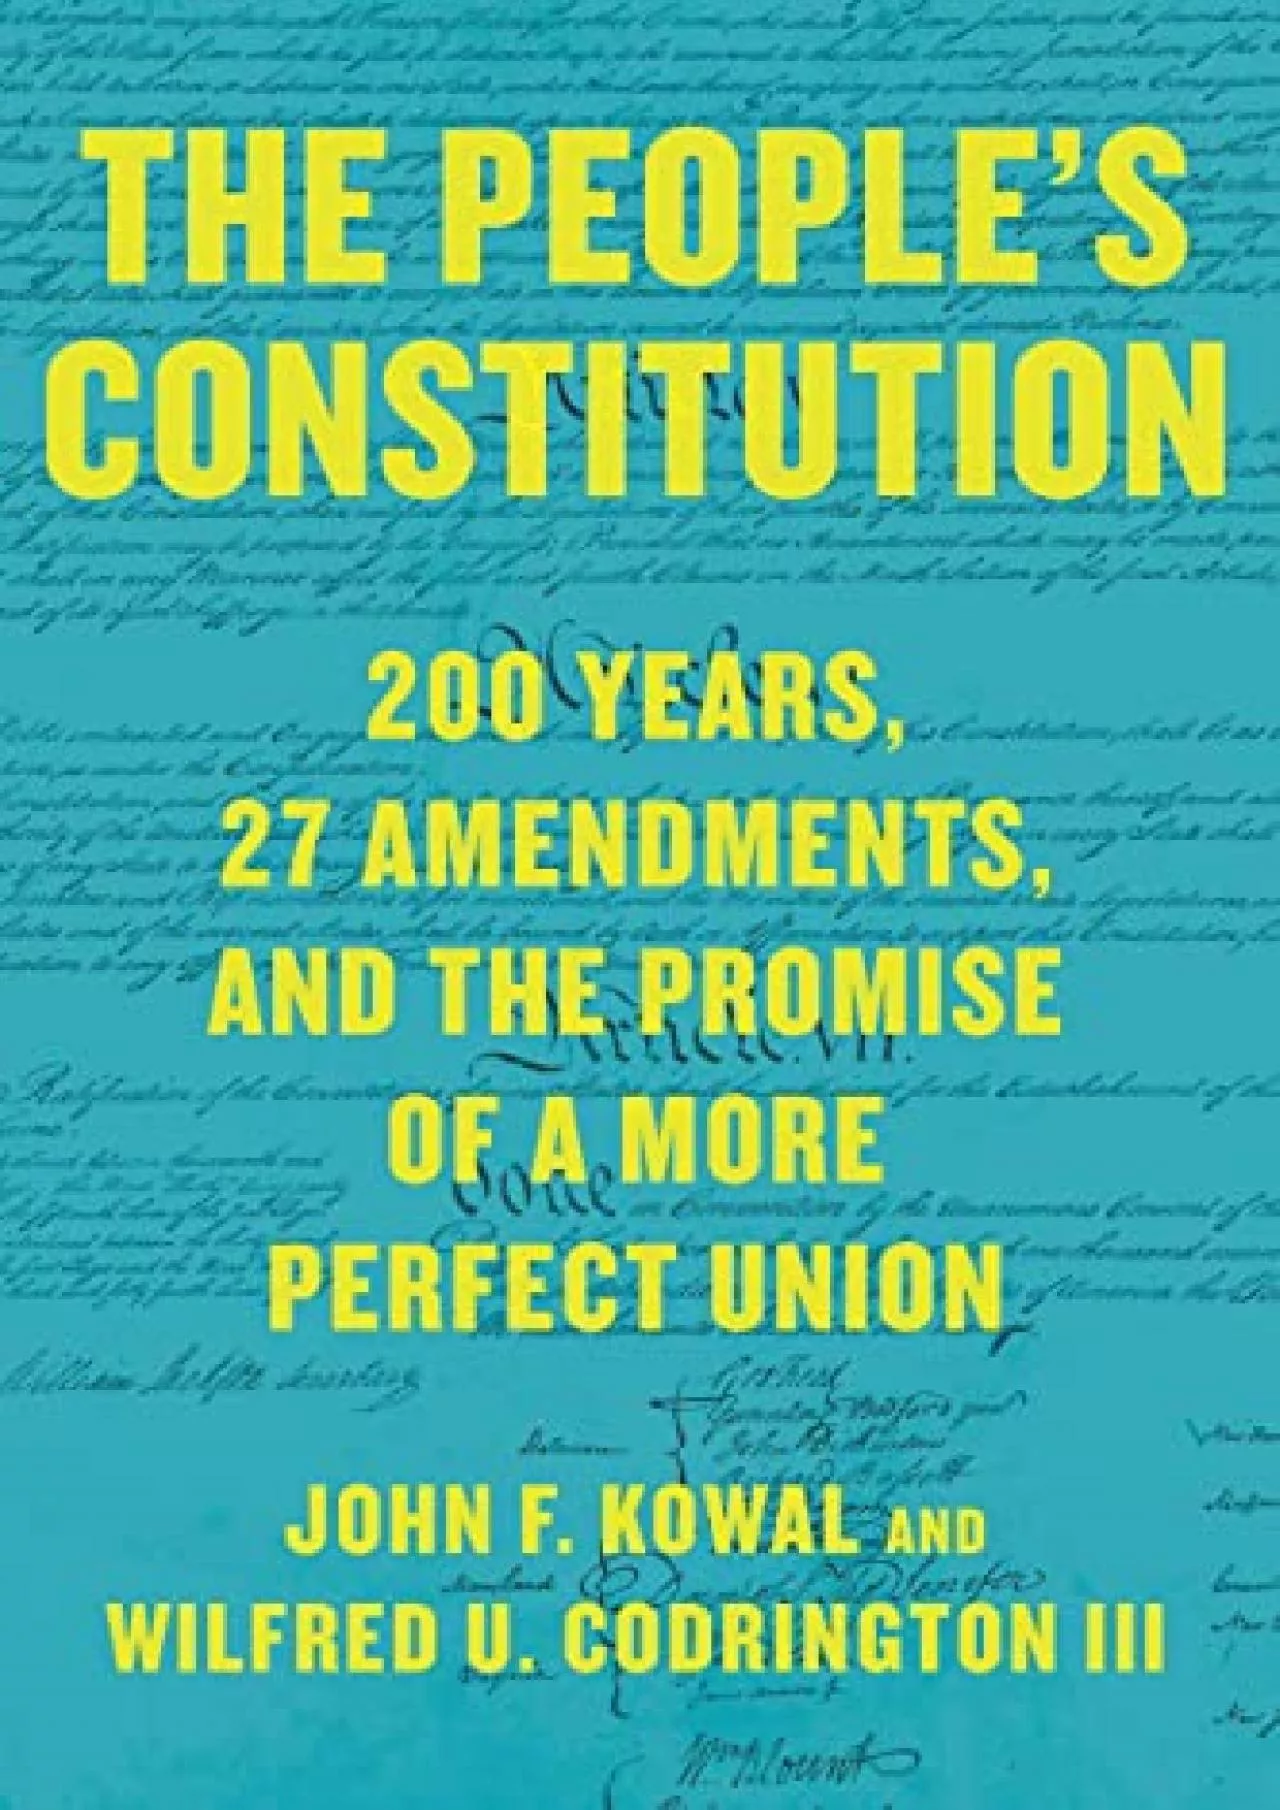 [PDF] DOWNLOAD The People’s Constitution: 200 Years, 27 Amendments, and the Promise